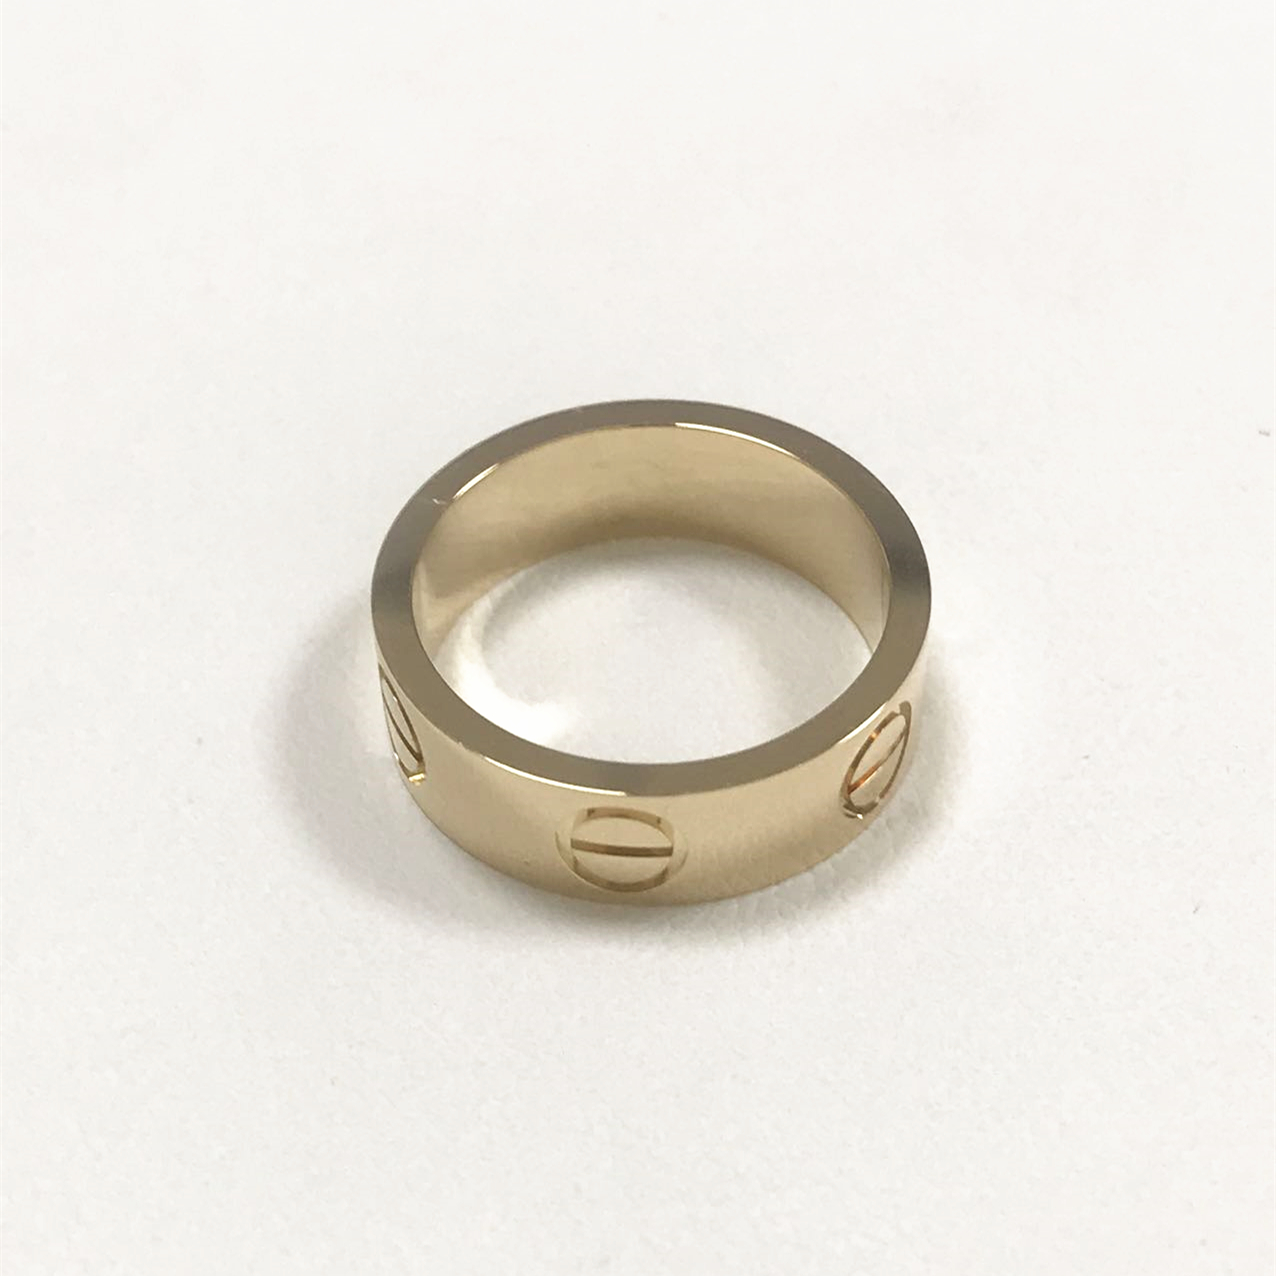 Mirror Copy Best 18K Gold Cartier Love Band Ring